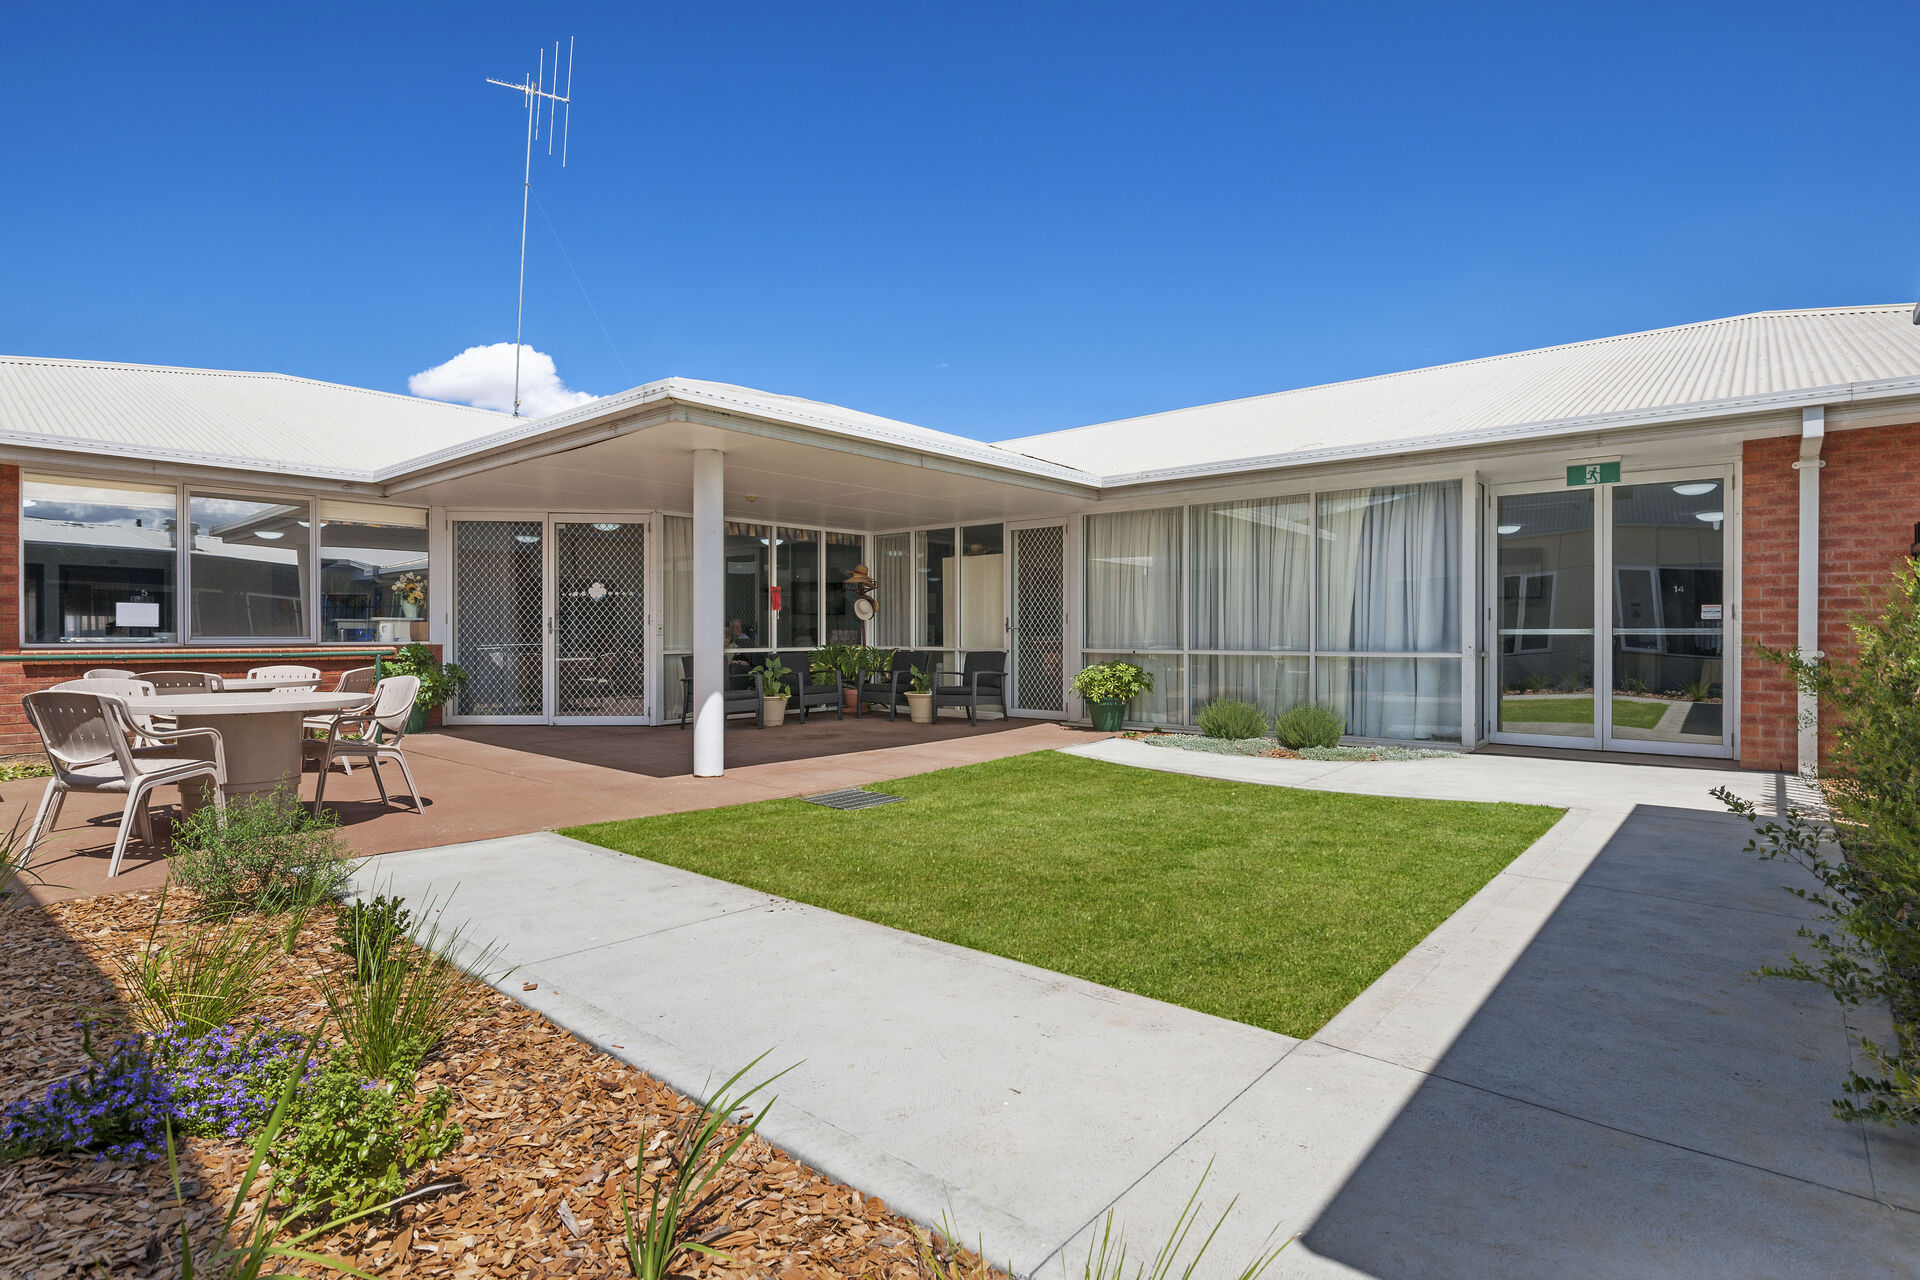 modern garden and outdoor sitting area for nursing home residents to enjoy at the one story baptistcare niola centre aged care home in parkes nsw